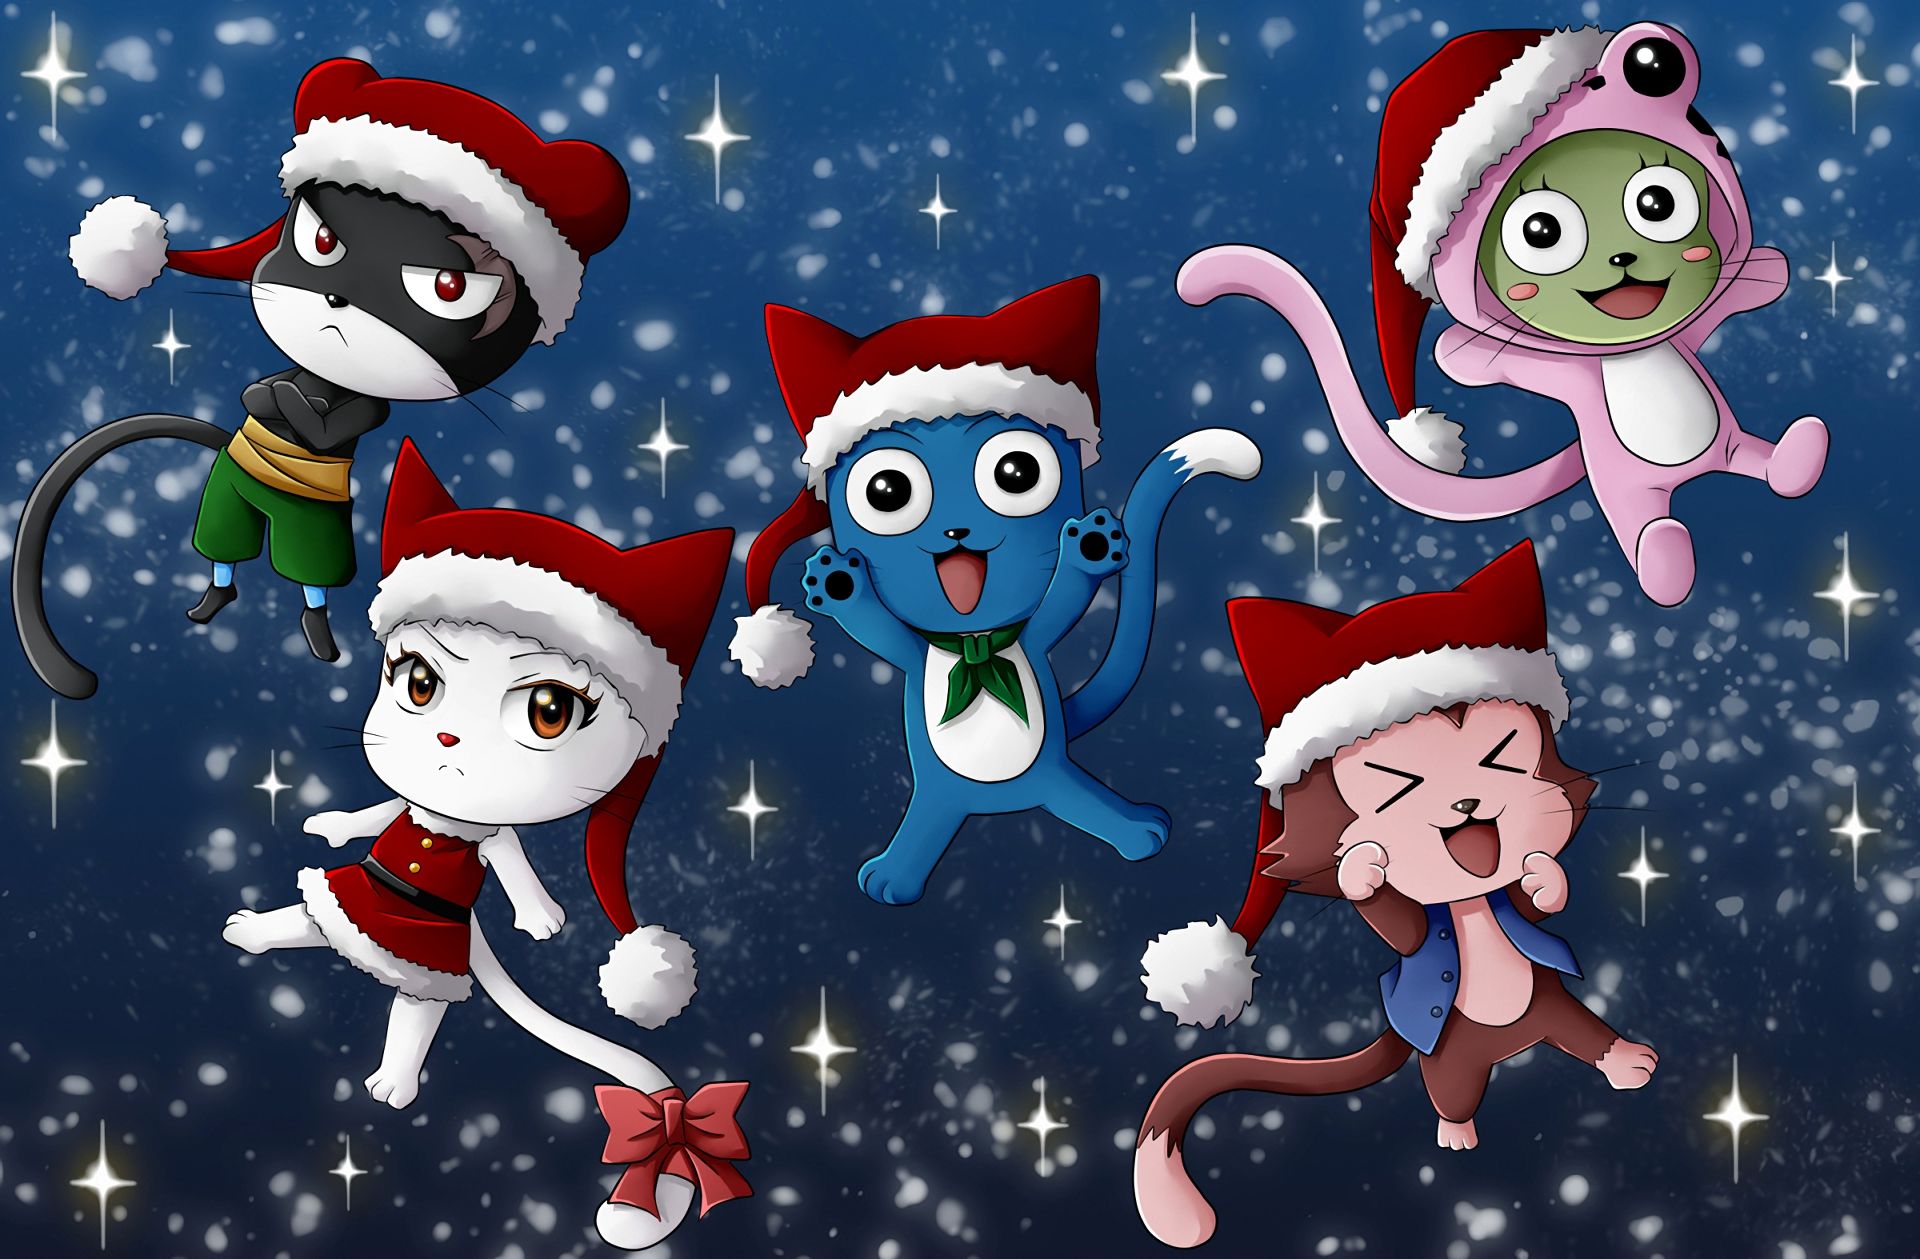 Fairy Tail Christmas Wallpapers